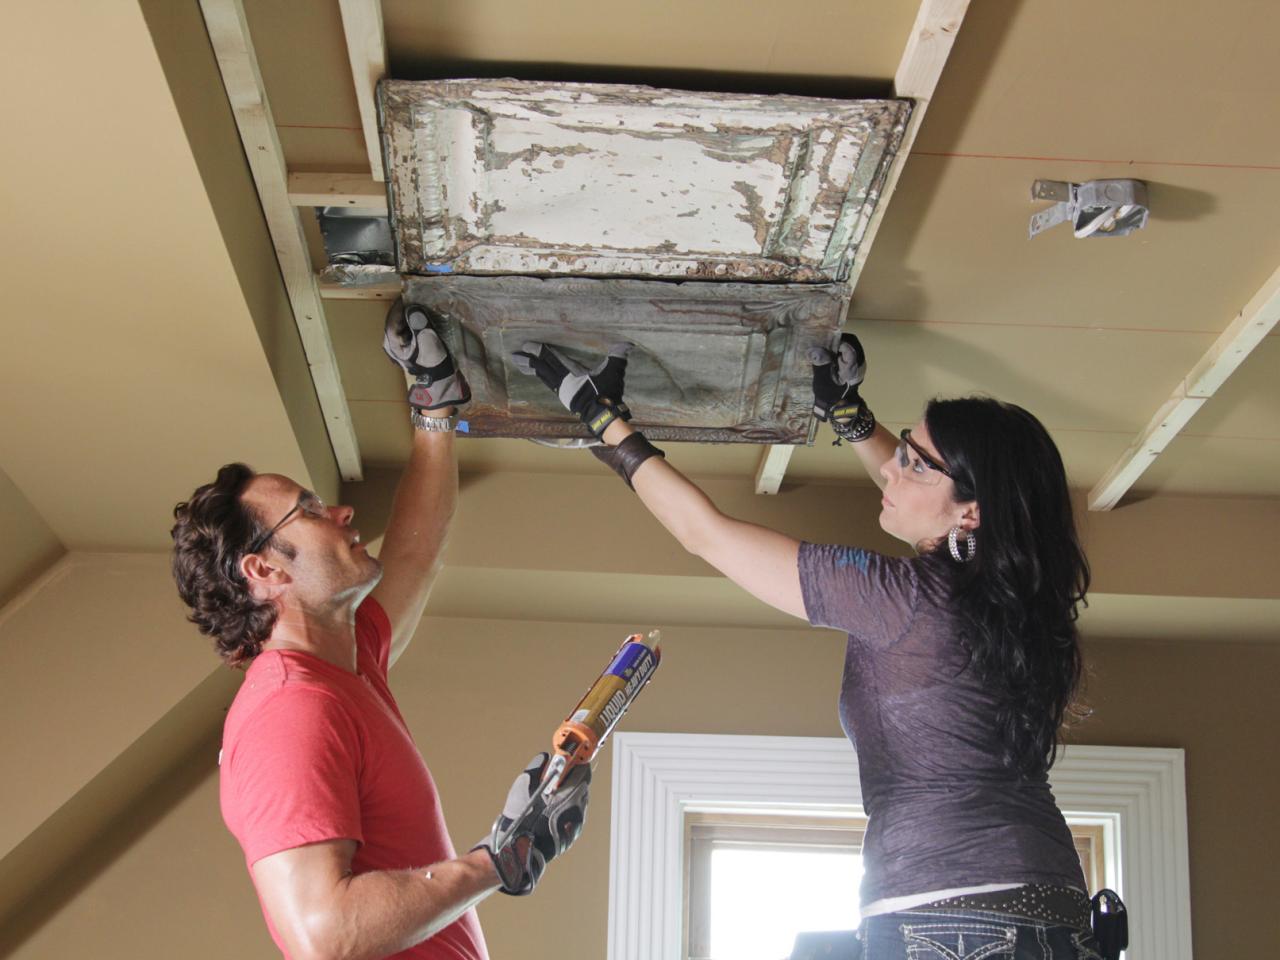 How To Install A Stamped Tin Ceiling, Tin Ceiling Tiles Craft Ideas